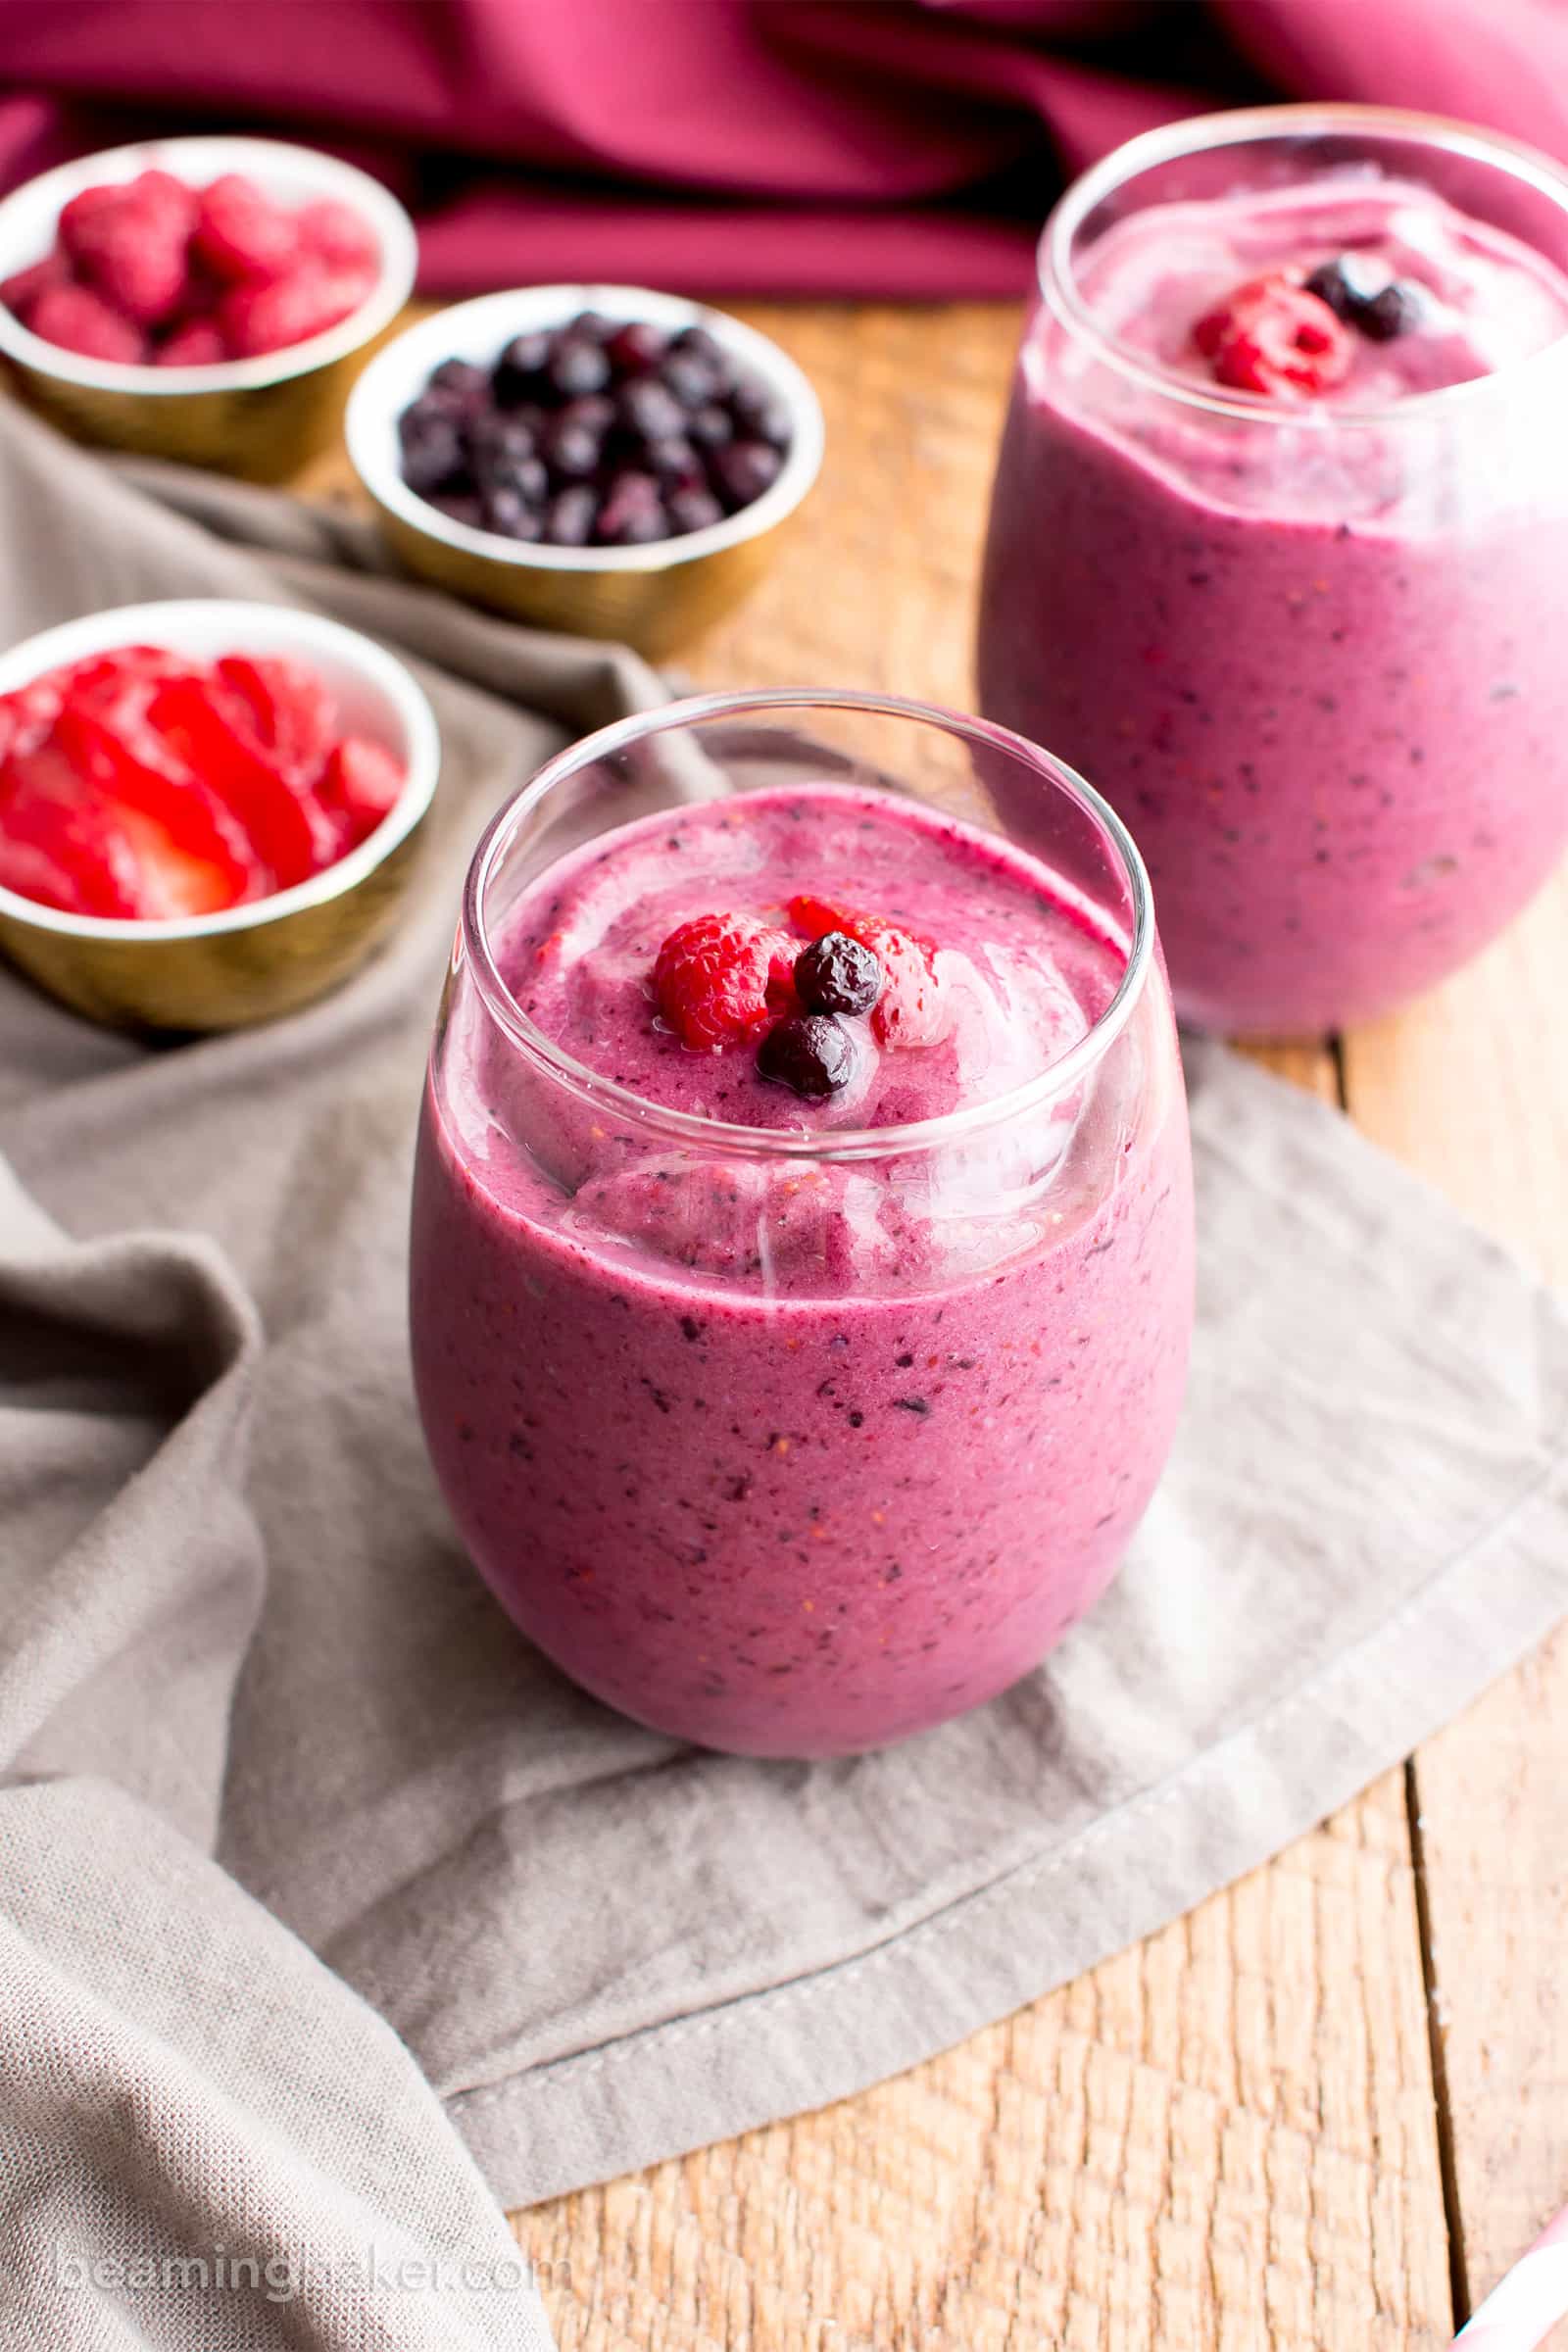 How To Make A Blueberry Smoothie Without Yogurt